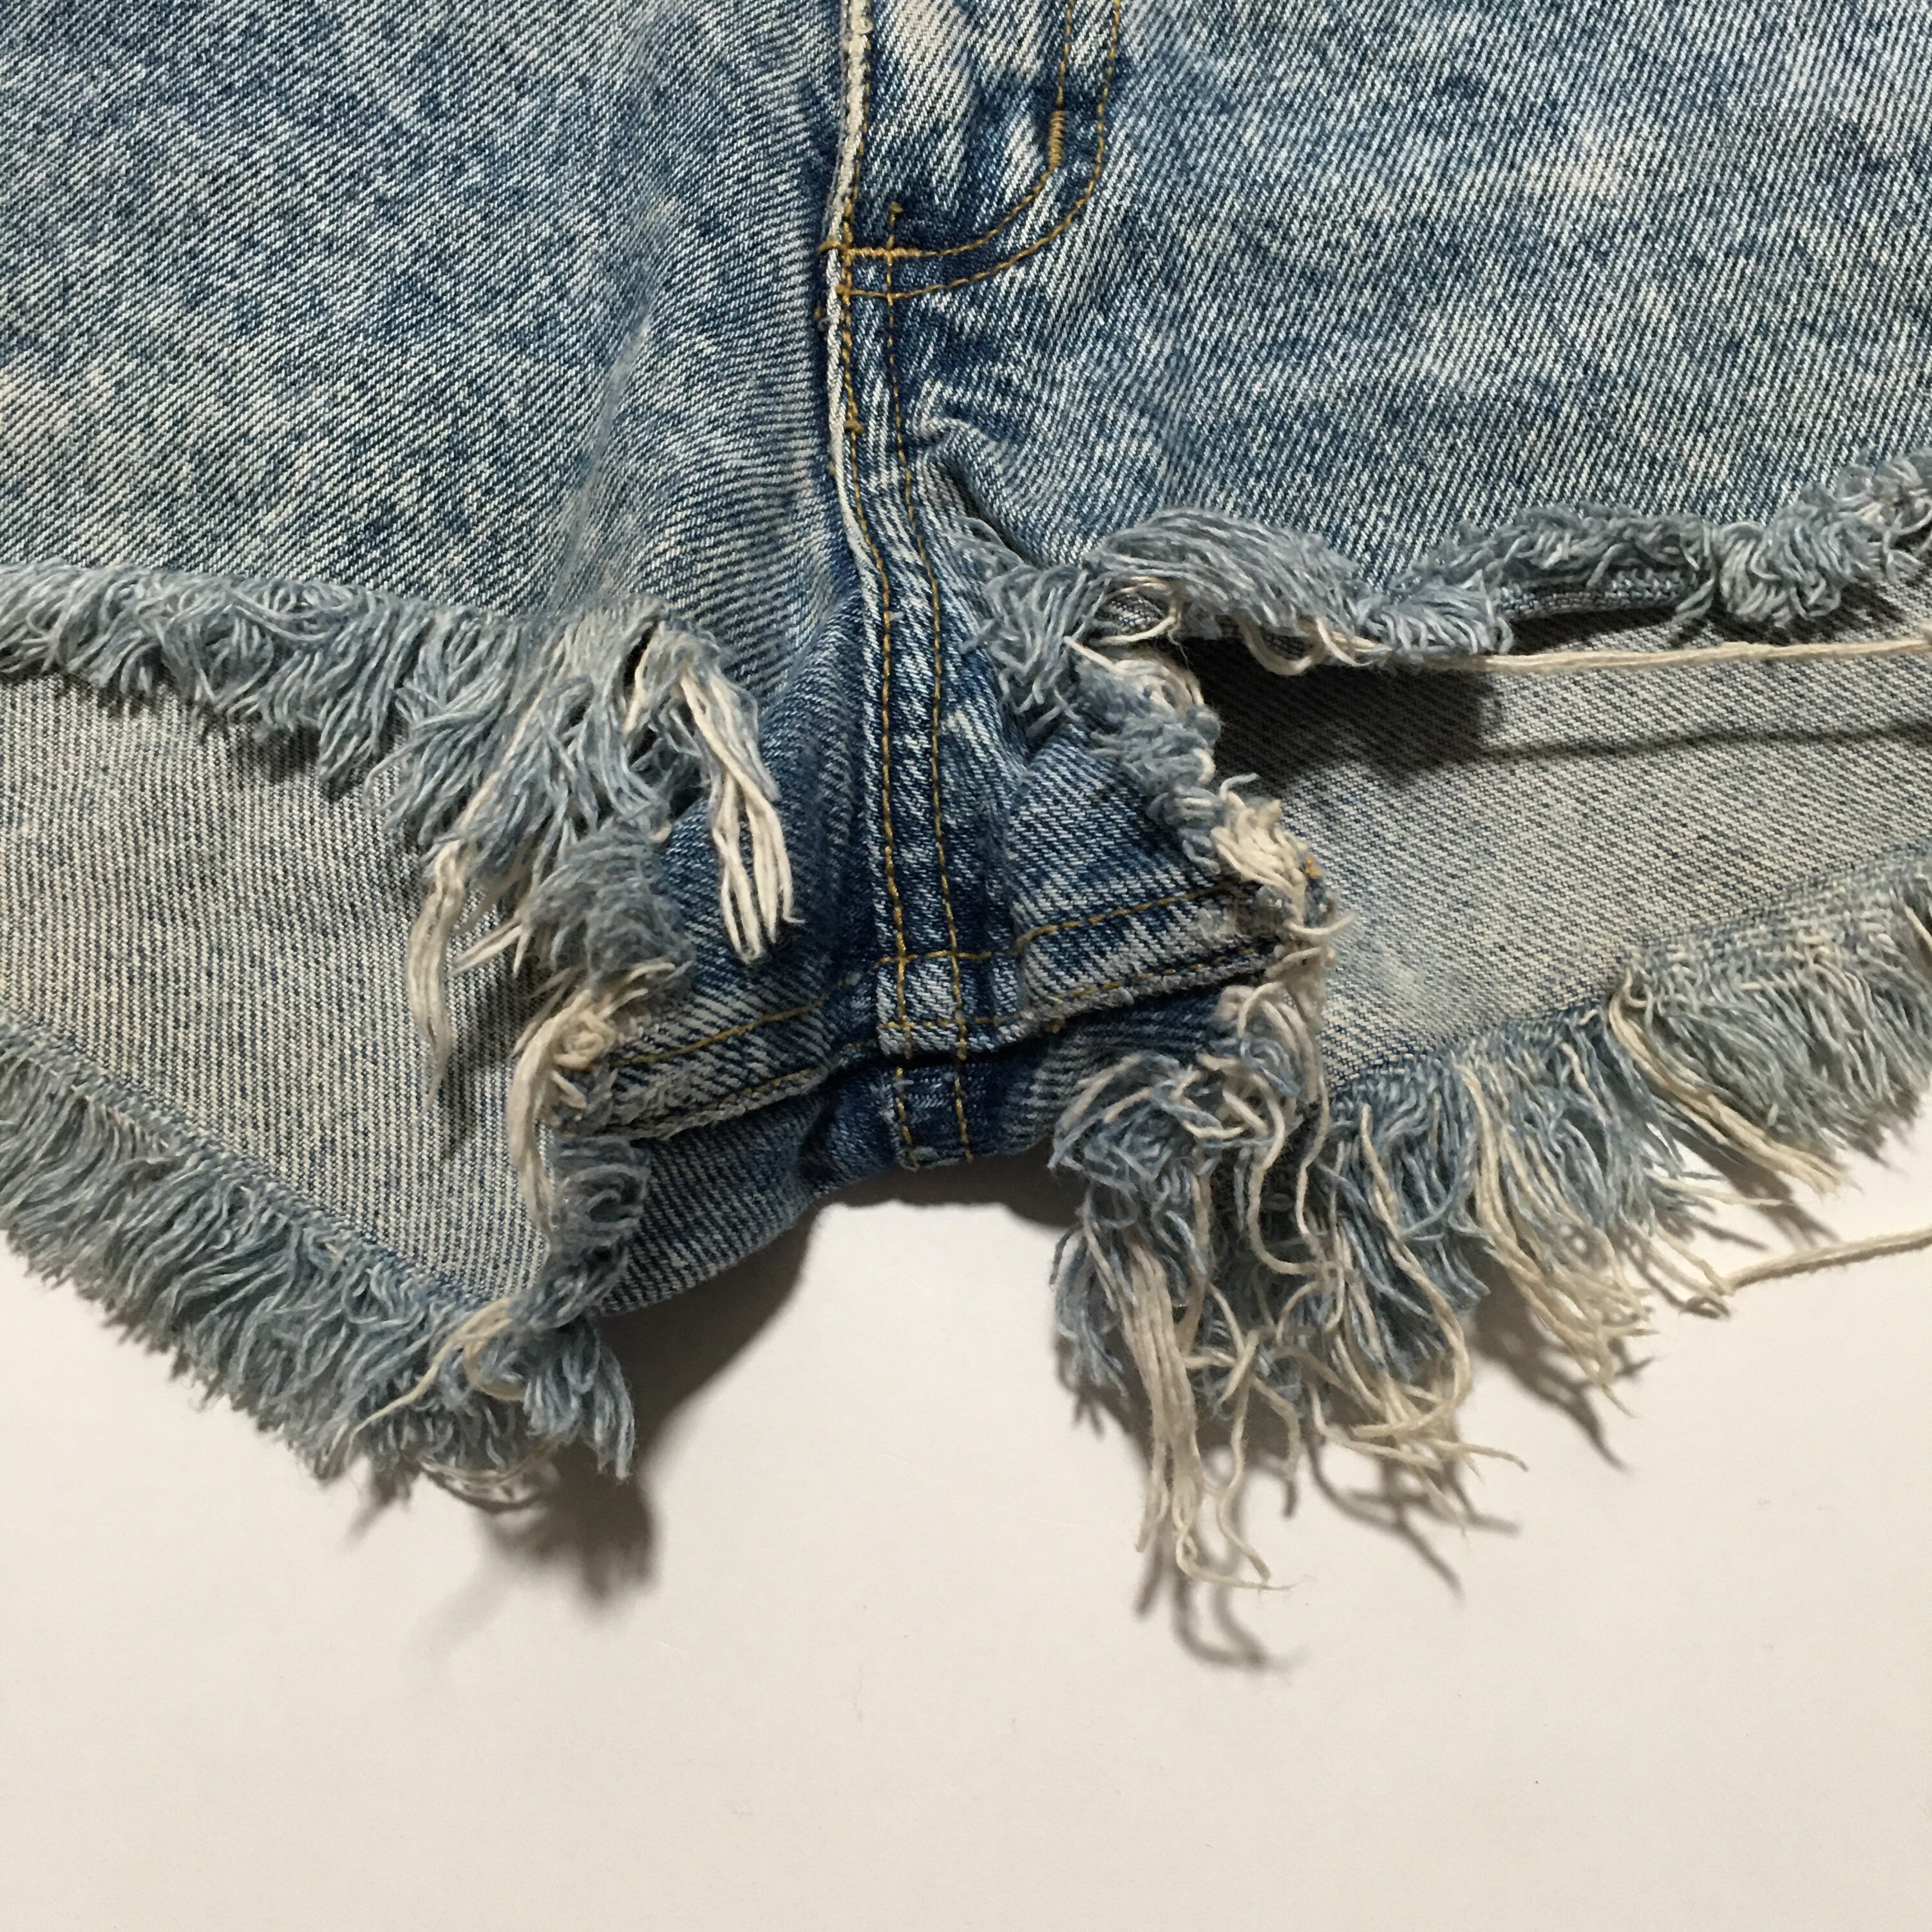 1980s GUESS by GEORGES MARCIANO Distressed Cut off Shorts // - Etsy